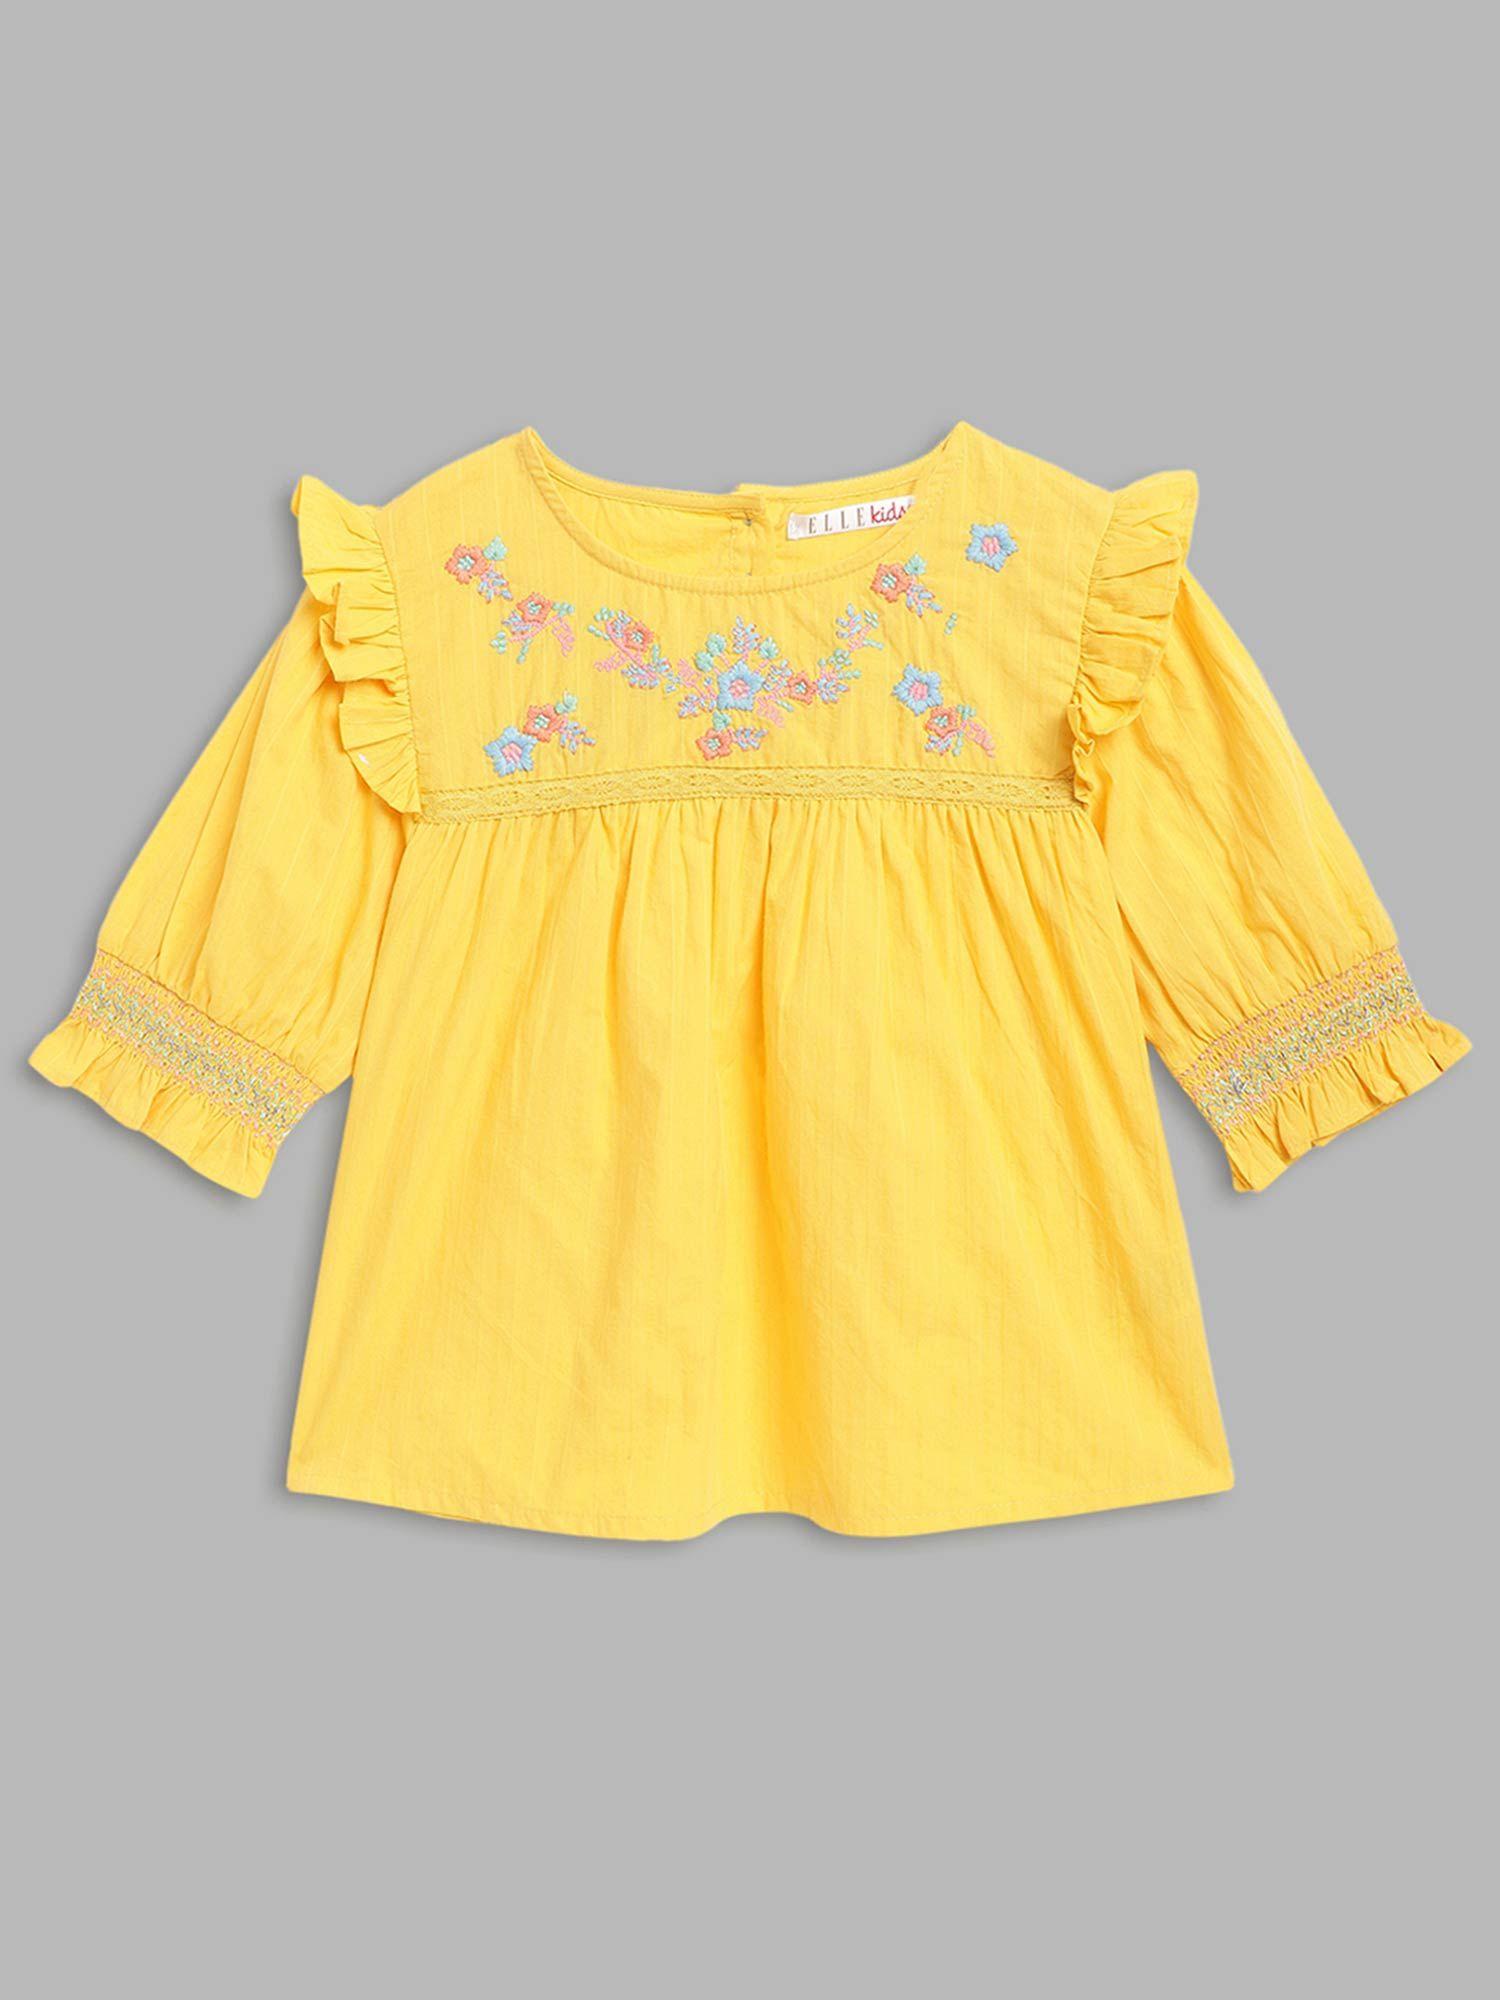 girls yellow embroidered top